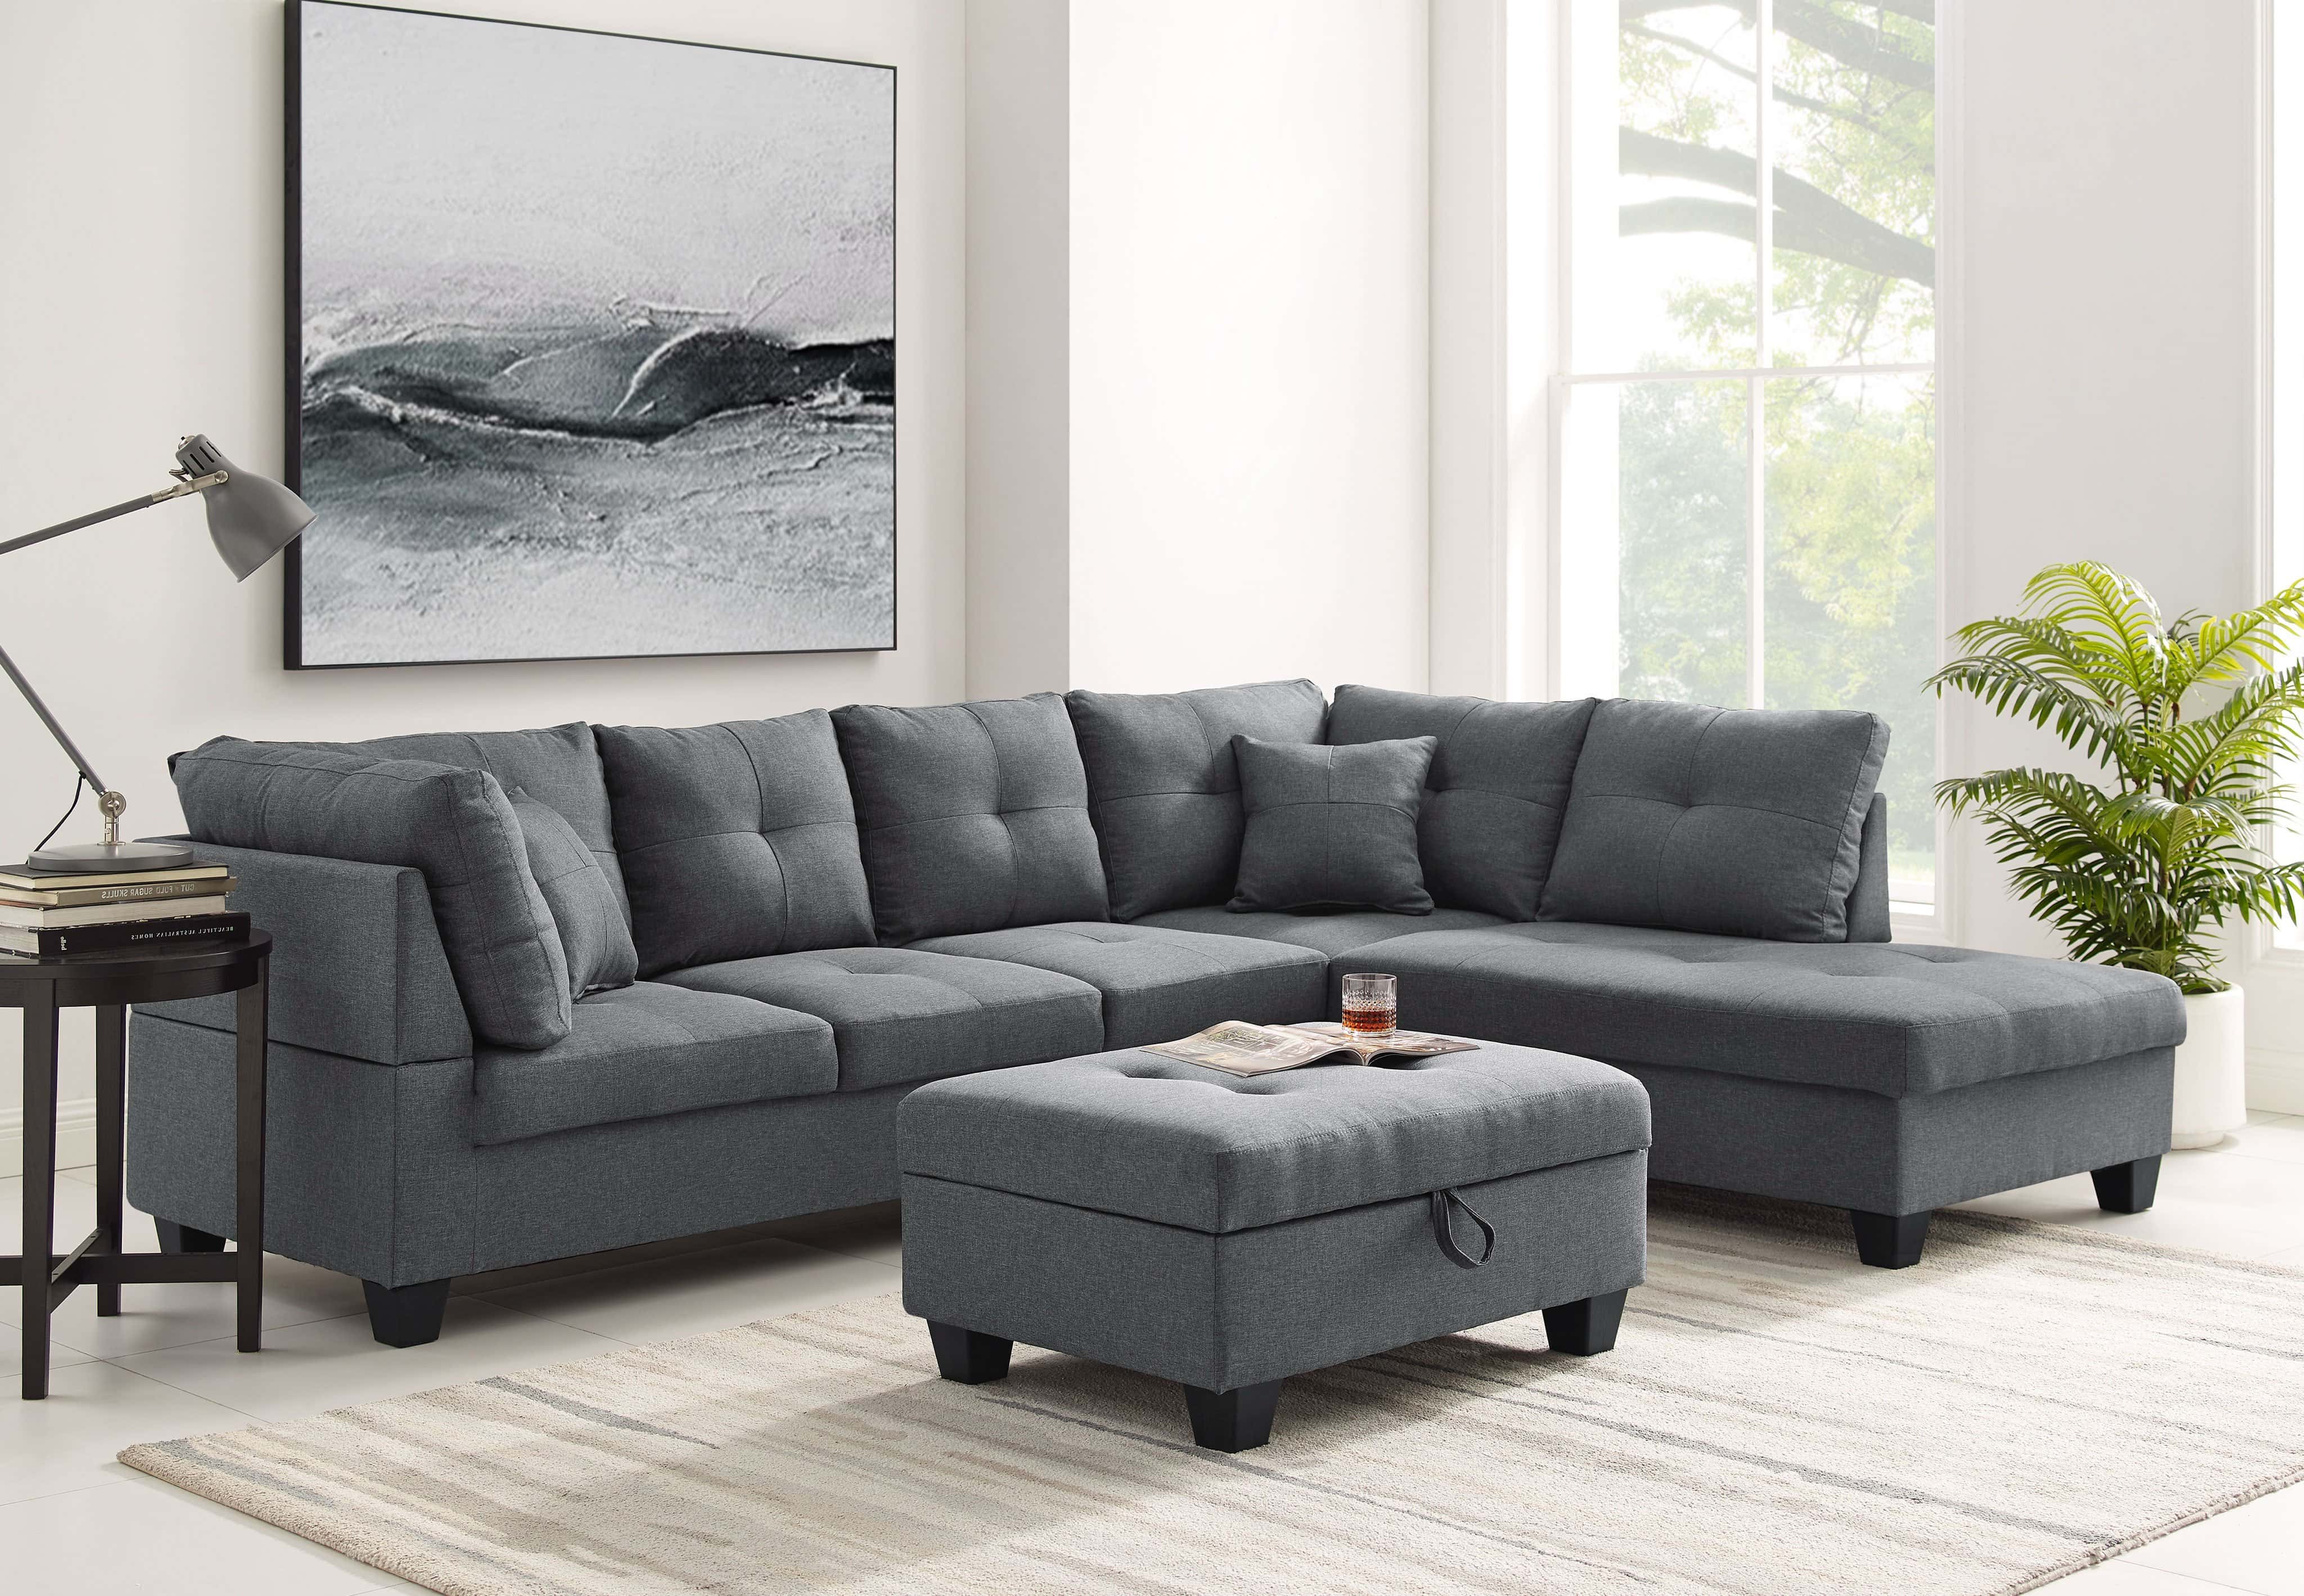 Spencer Dark Gray Sectional with Storage Ottoman by Prestige Furnishings